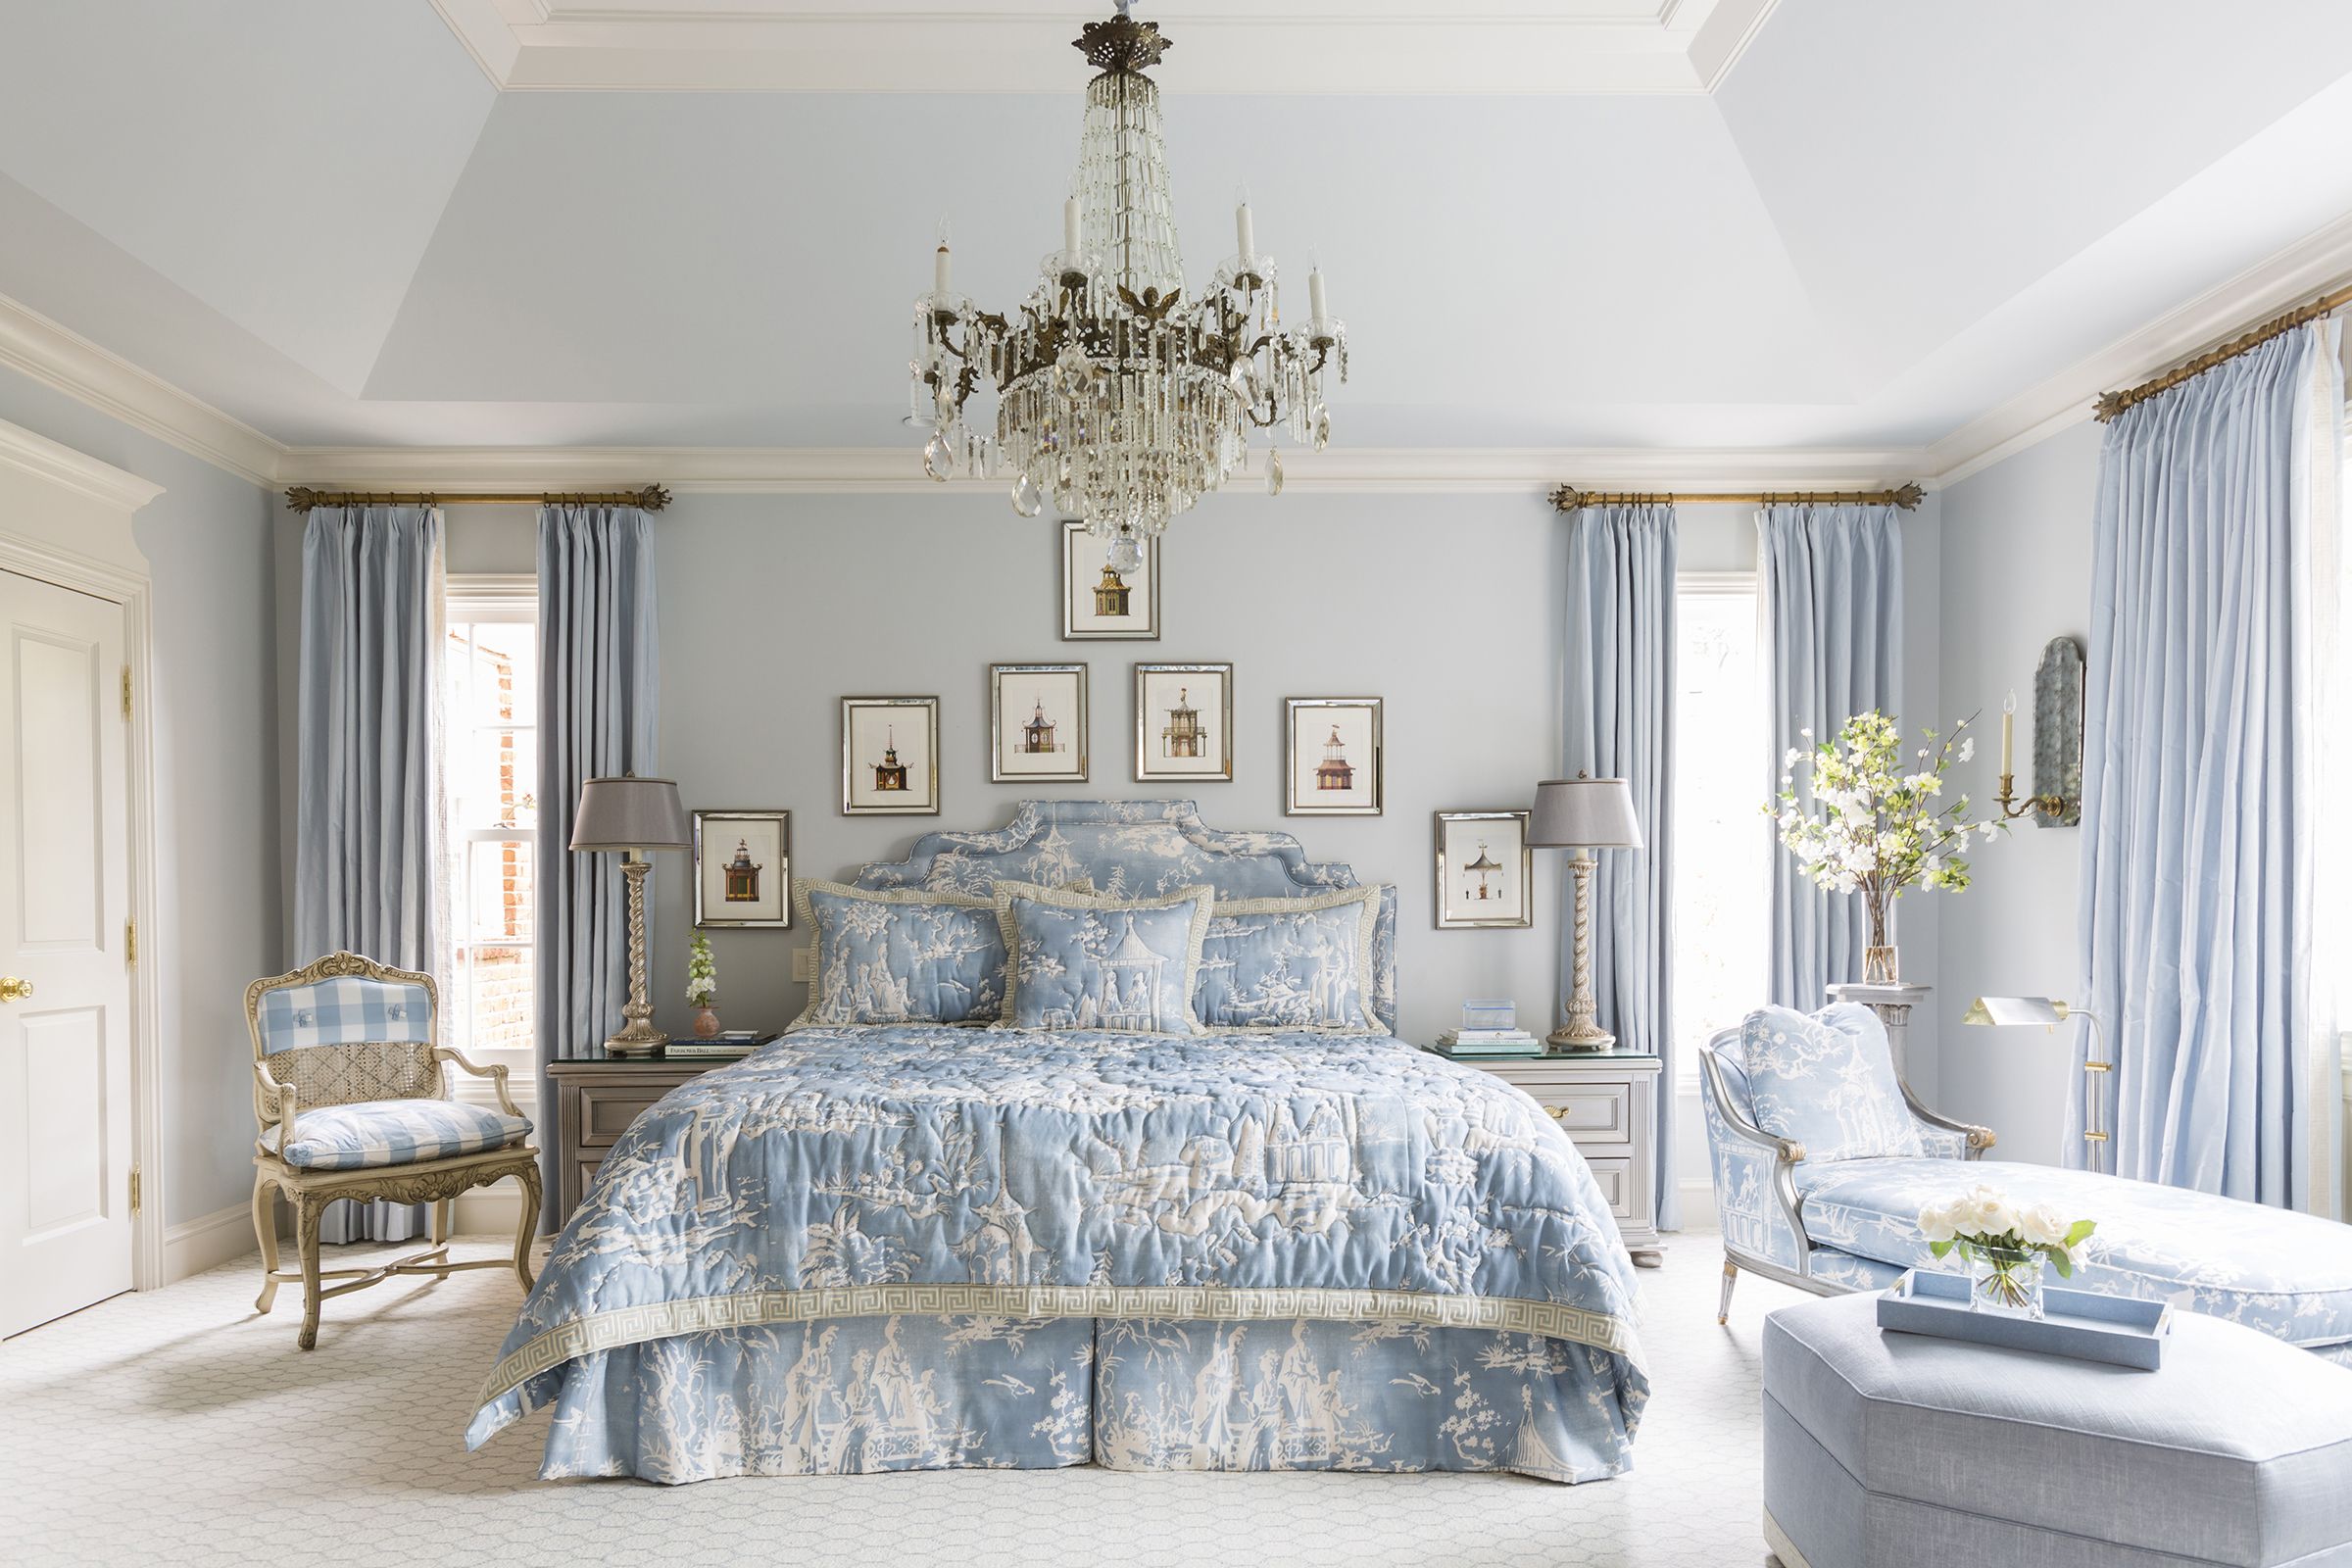 23 Decorating Tricks For Your Bedroom Chandeliers